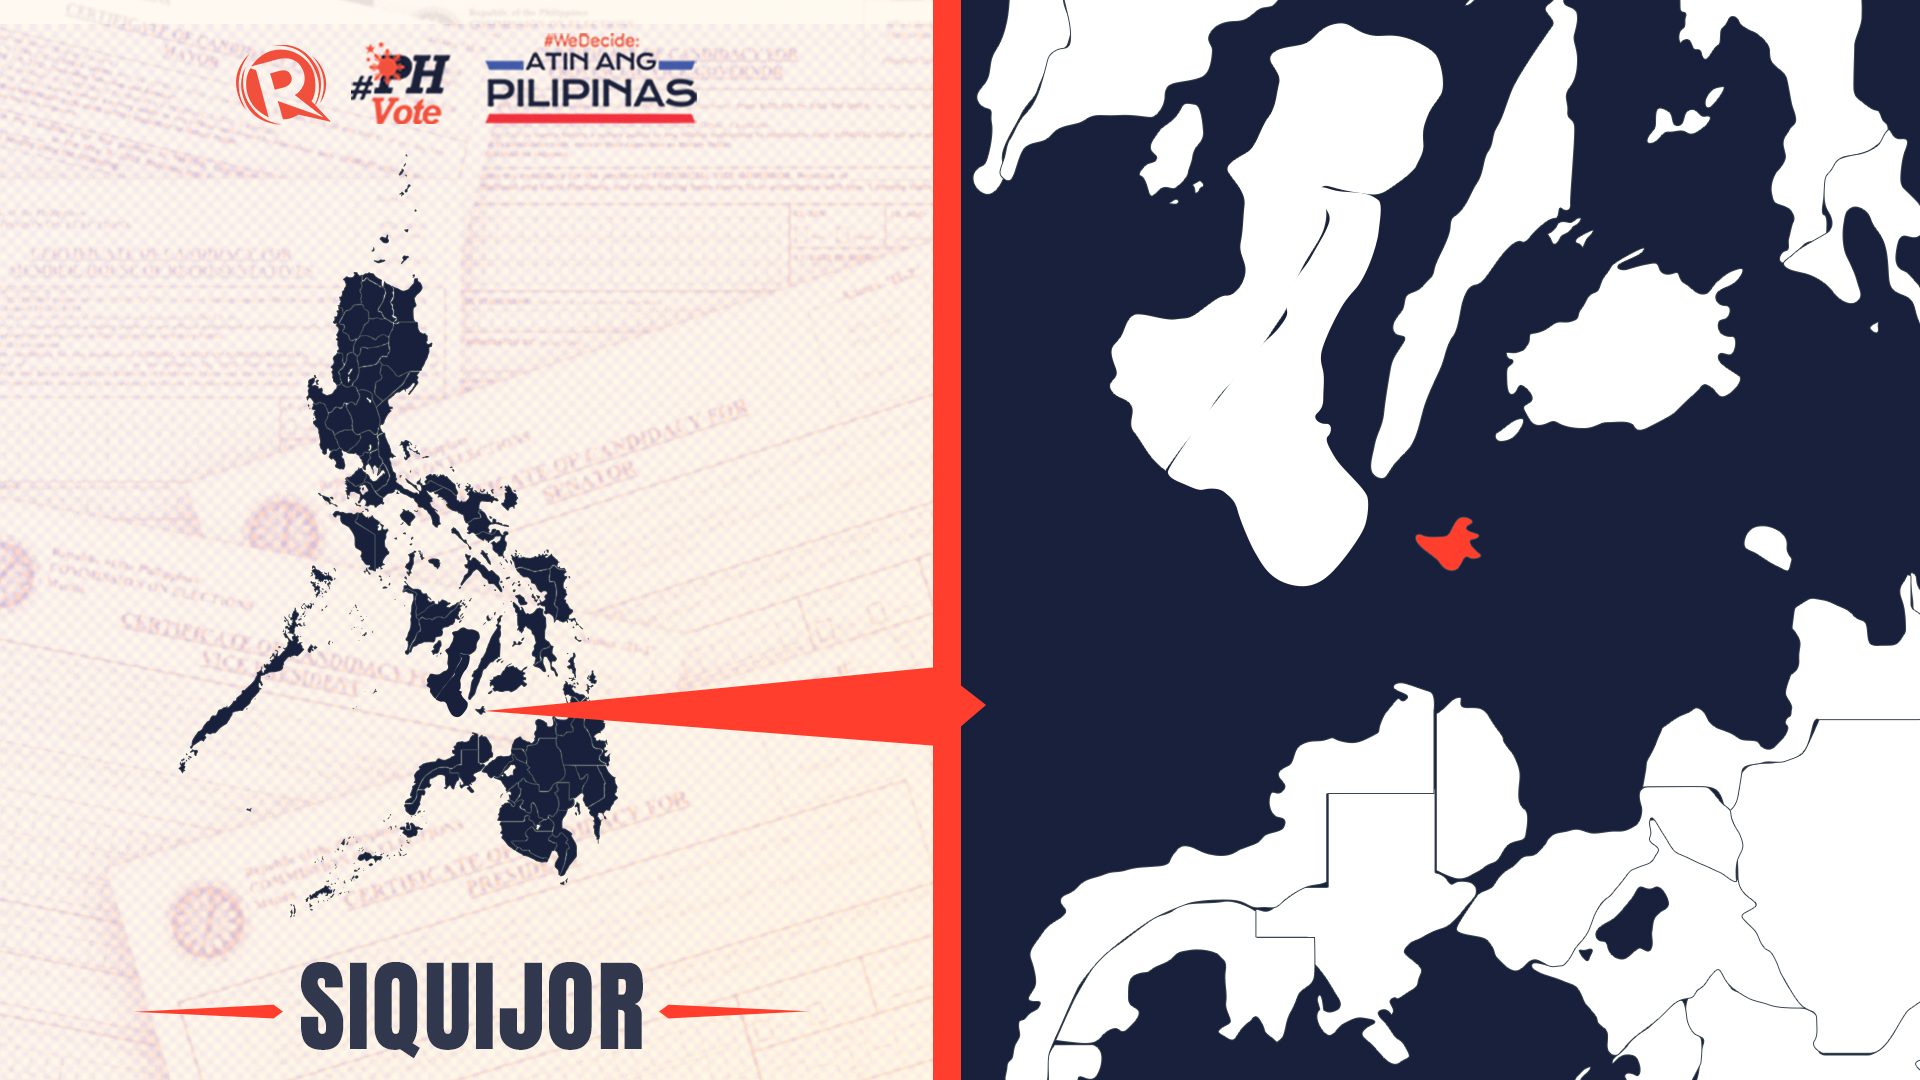 LIST: Who is running in Siquijor in the 2022 Philippine elections?